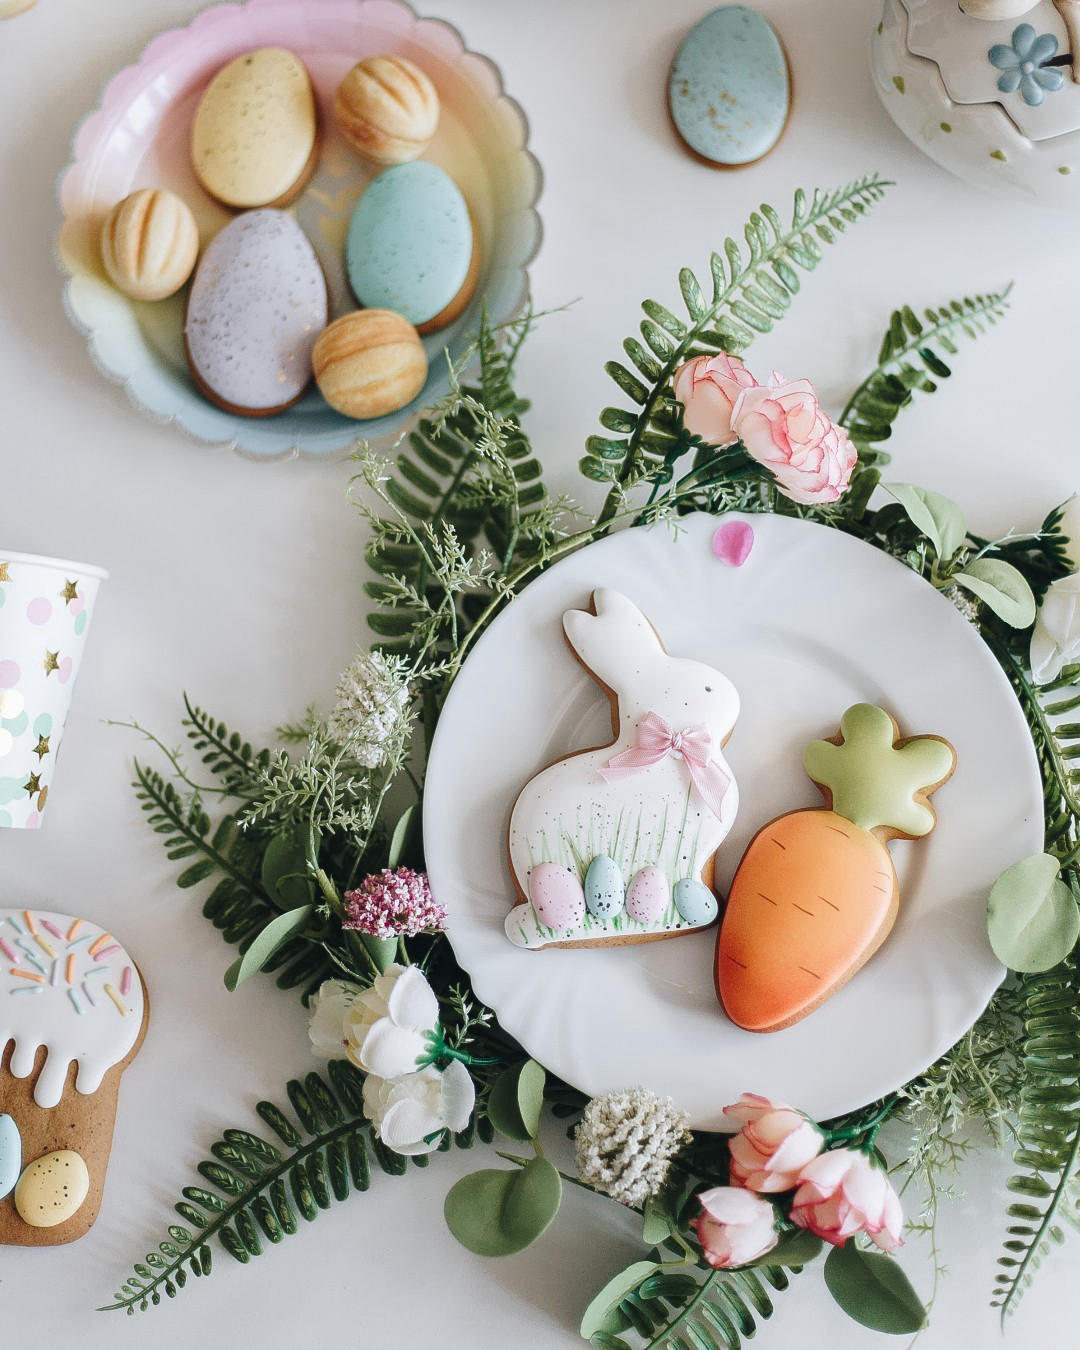 image  1 Happy Easter from all of us at Four Seasons Hotel Westlake Village